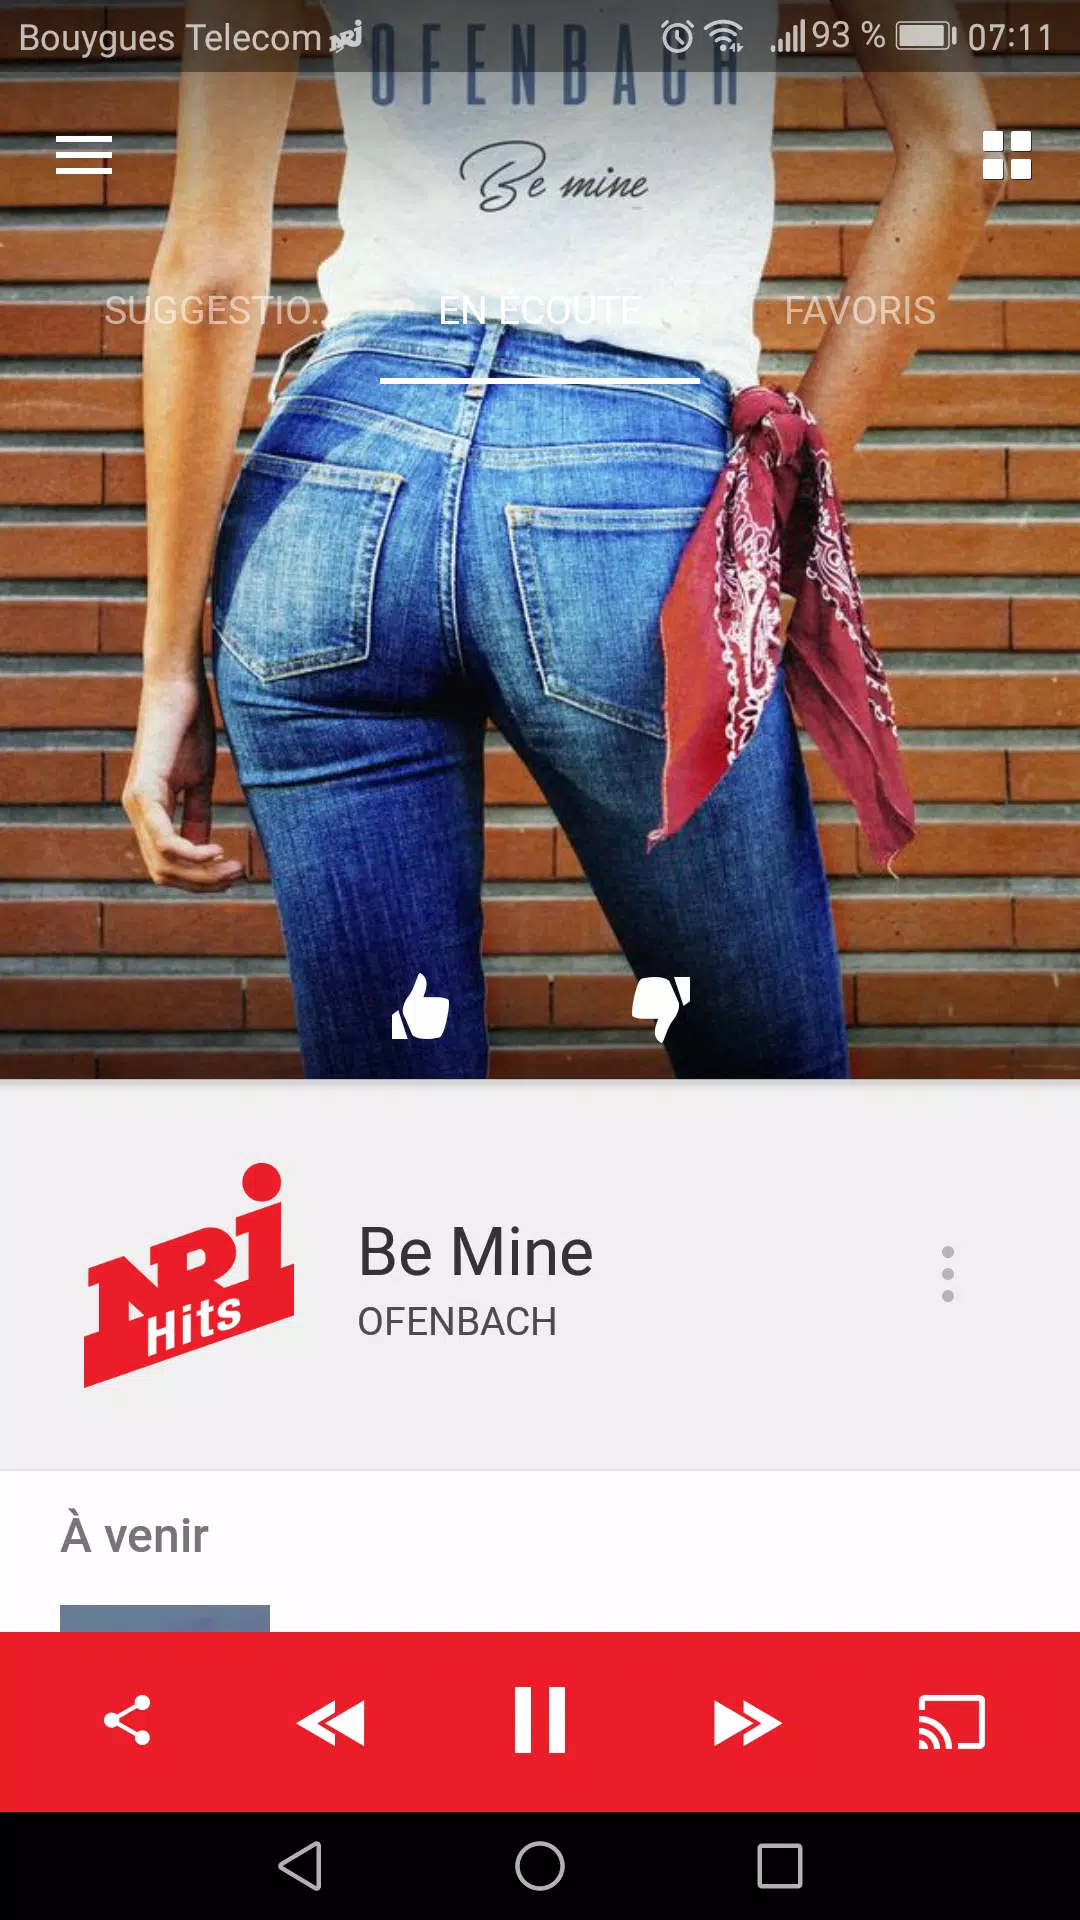 NRJ Maroc APK for Android Download